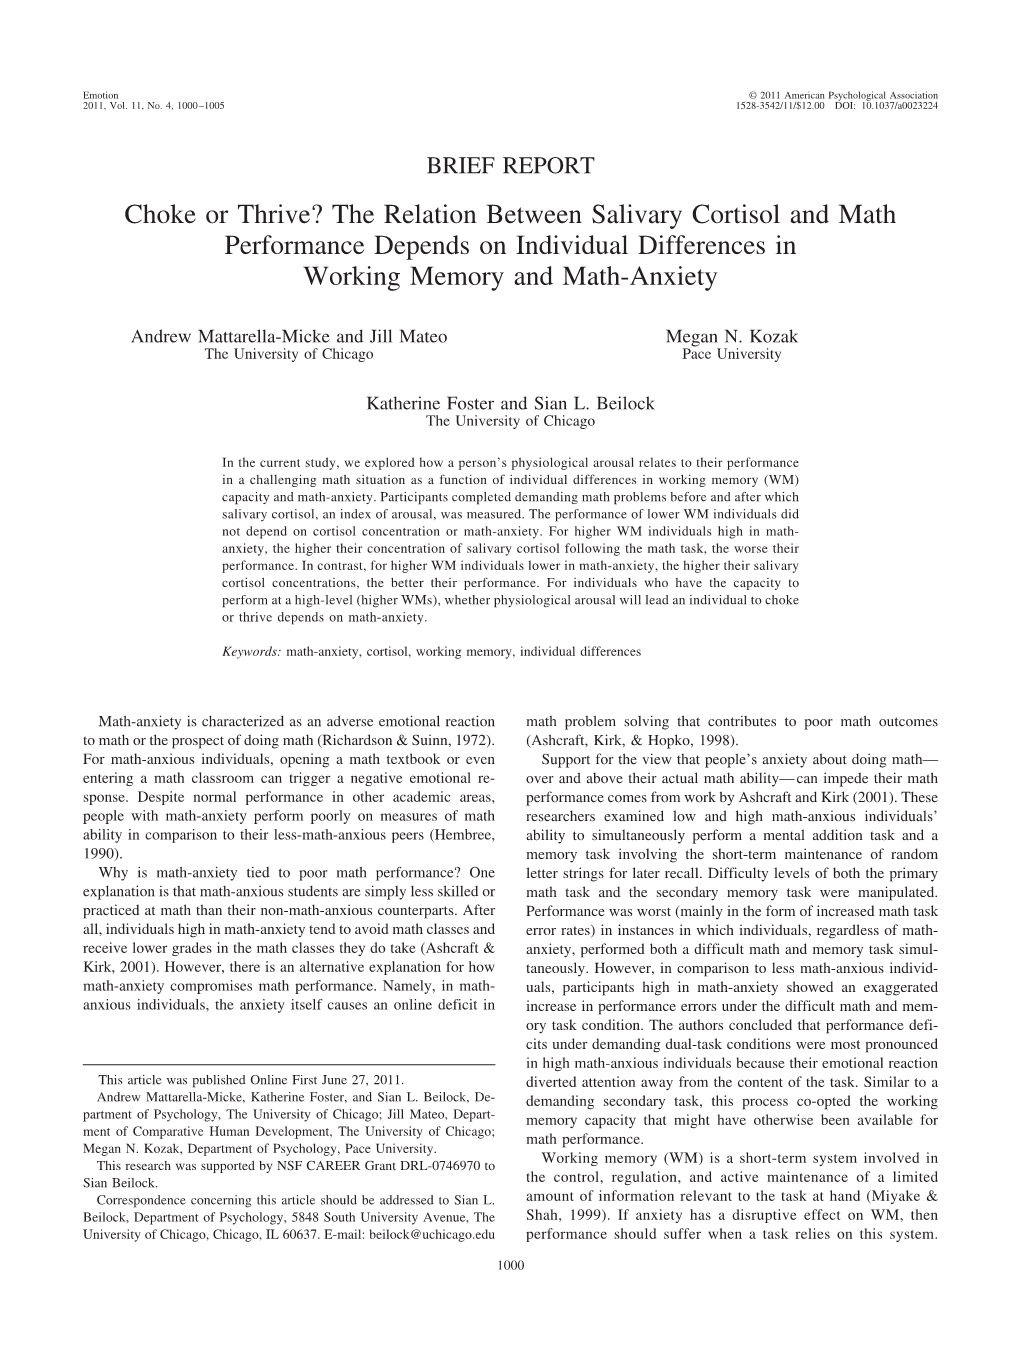 Choke Or Thrive? the Relation Between Salivary Cortisol and Math Performance Depends on Individual Differences in Working Memory and Math-Anxiety